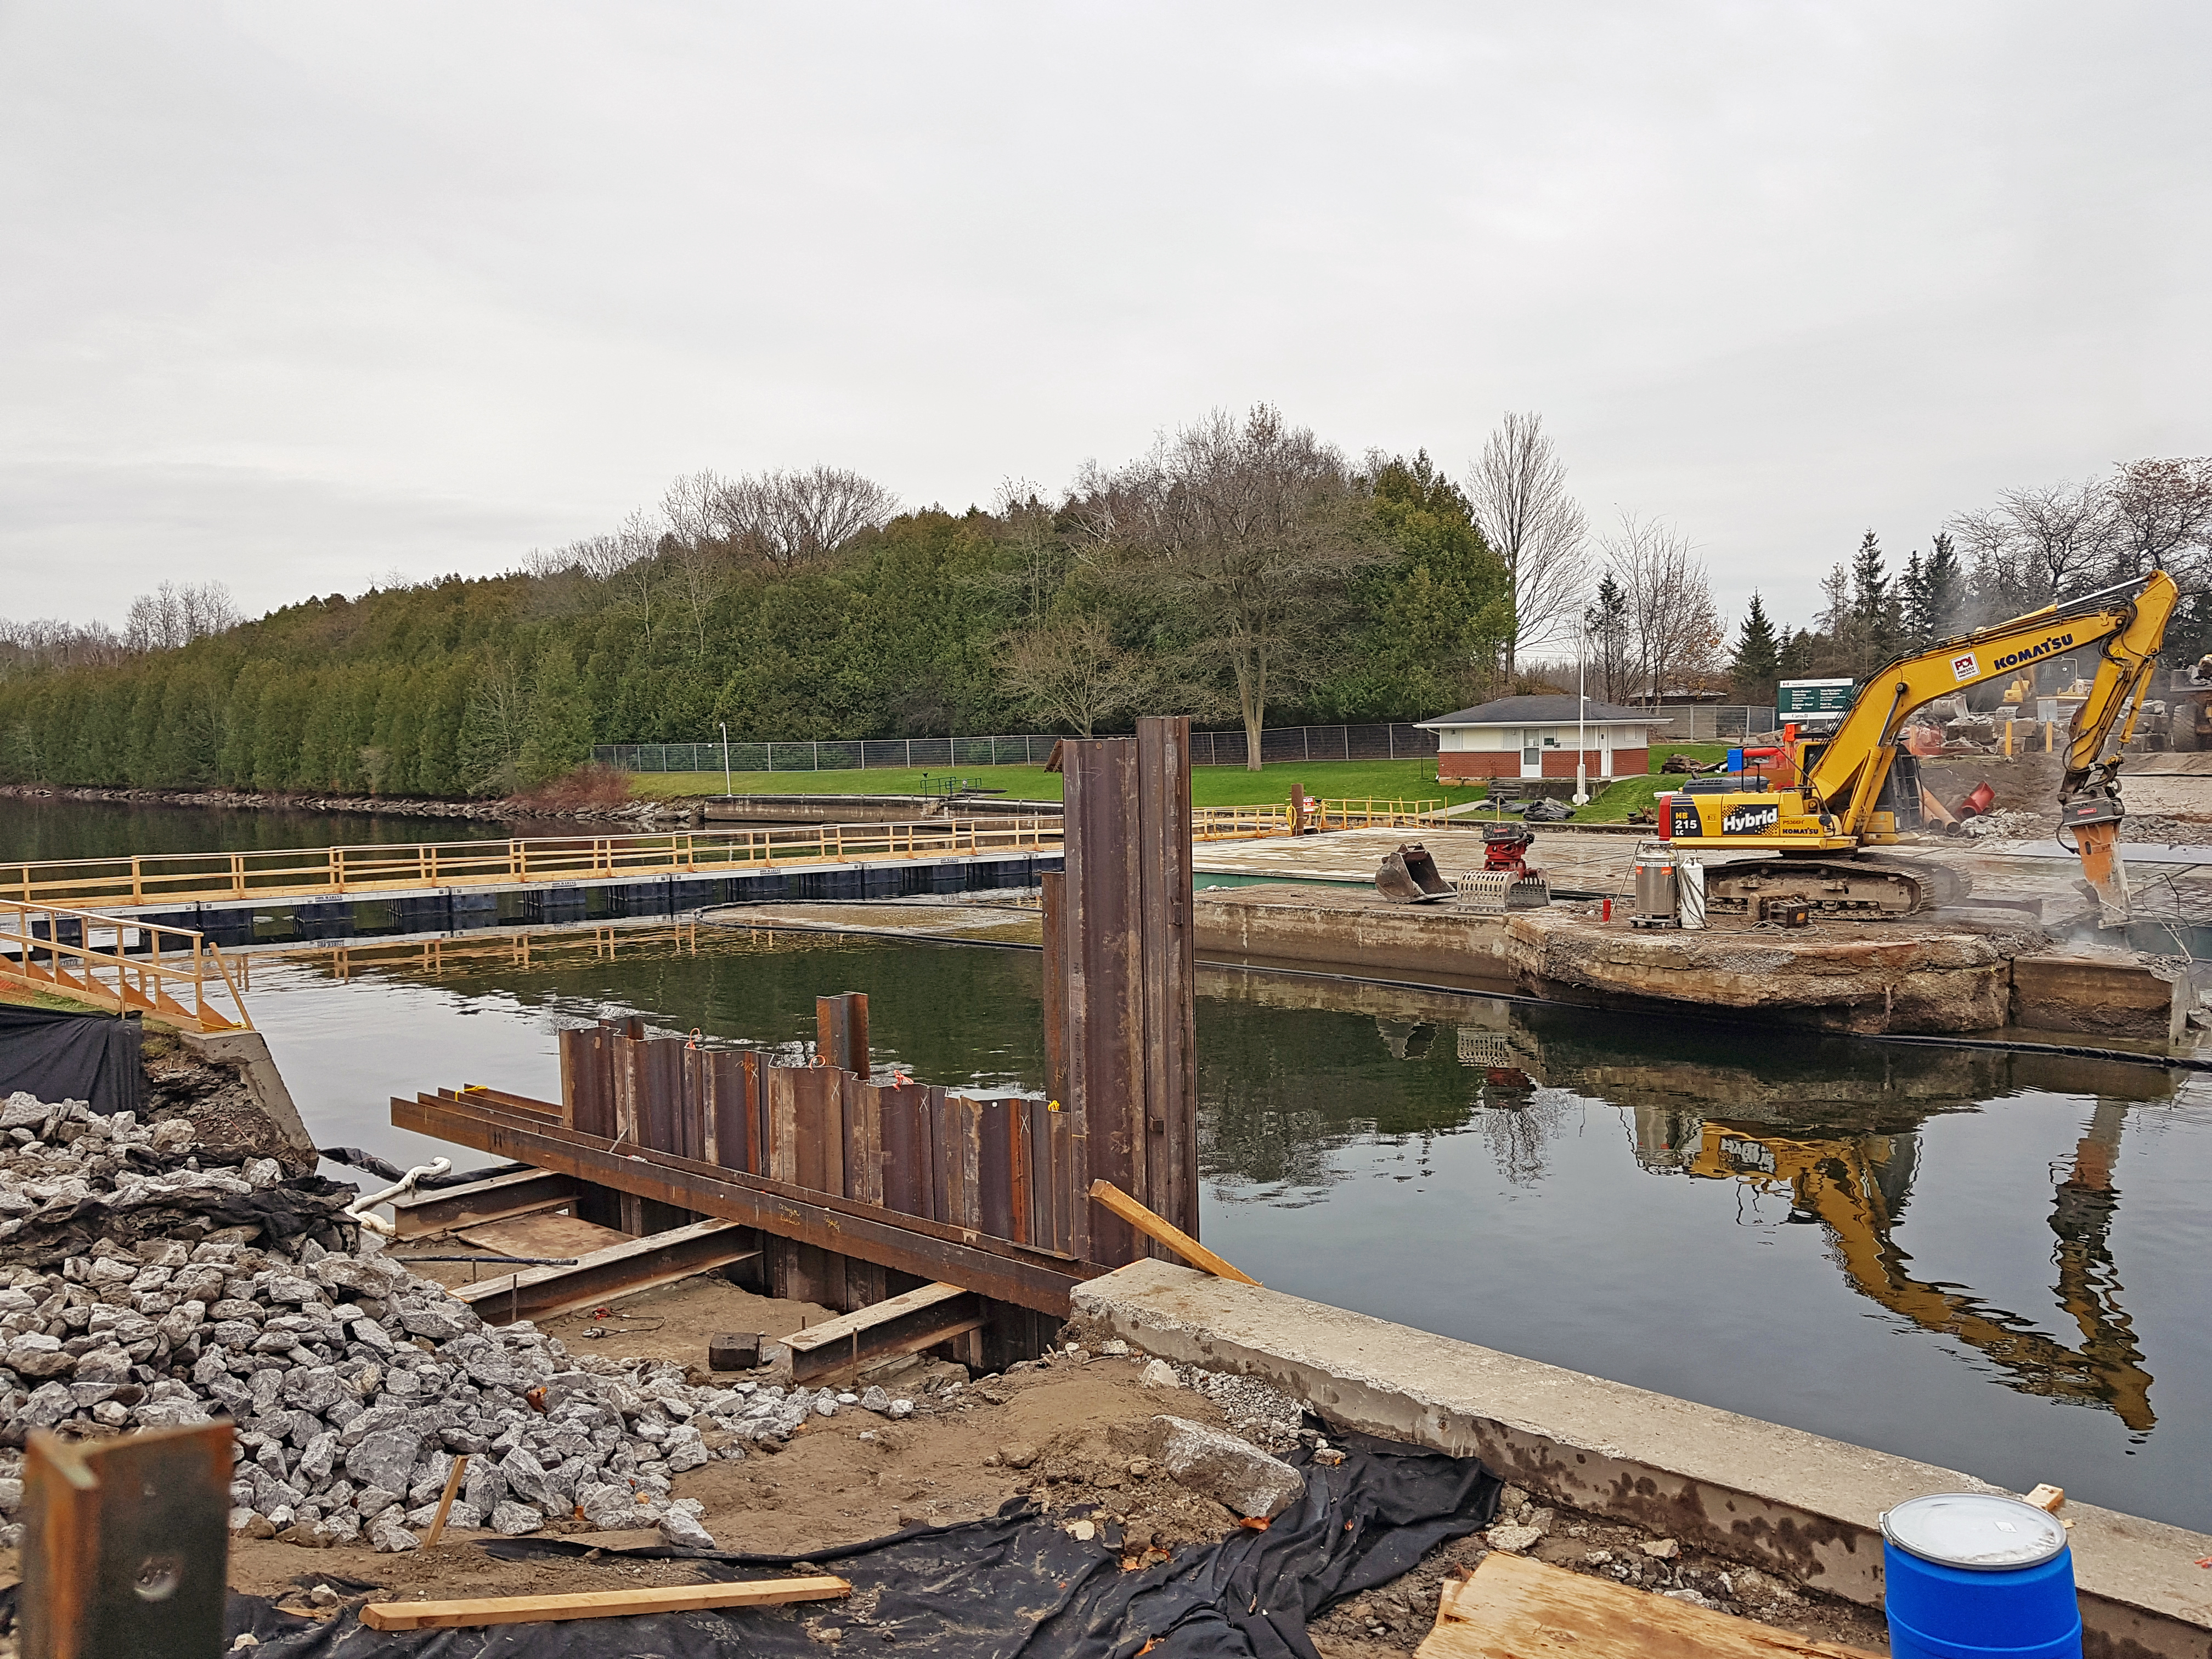 Sheet pile installed against the existing north abutment in the foreground, hydraulic rock breaker in the background breaking the centre pier.